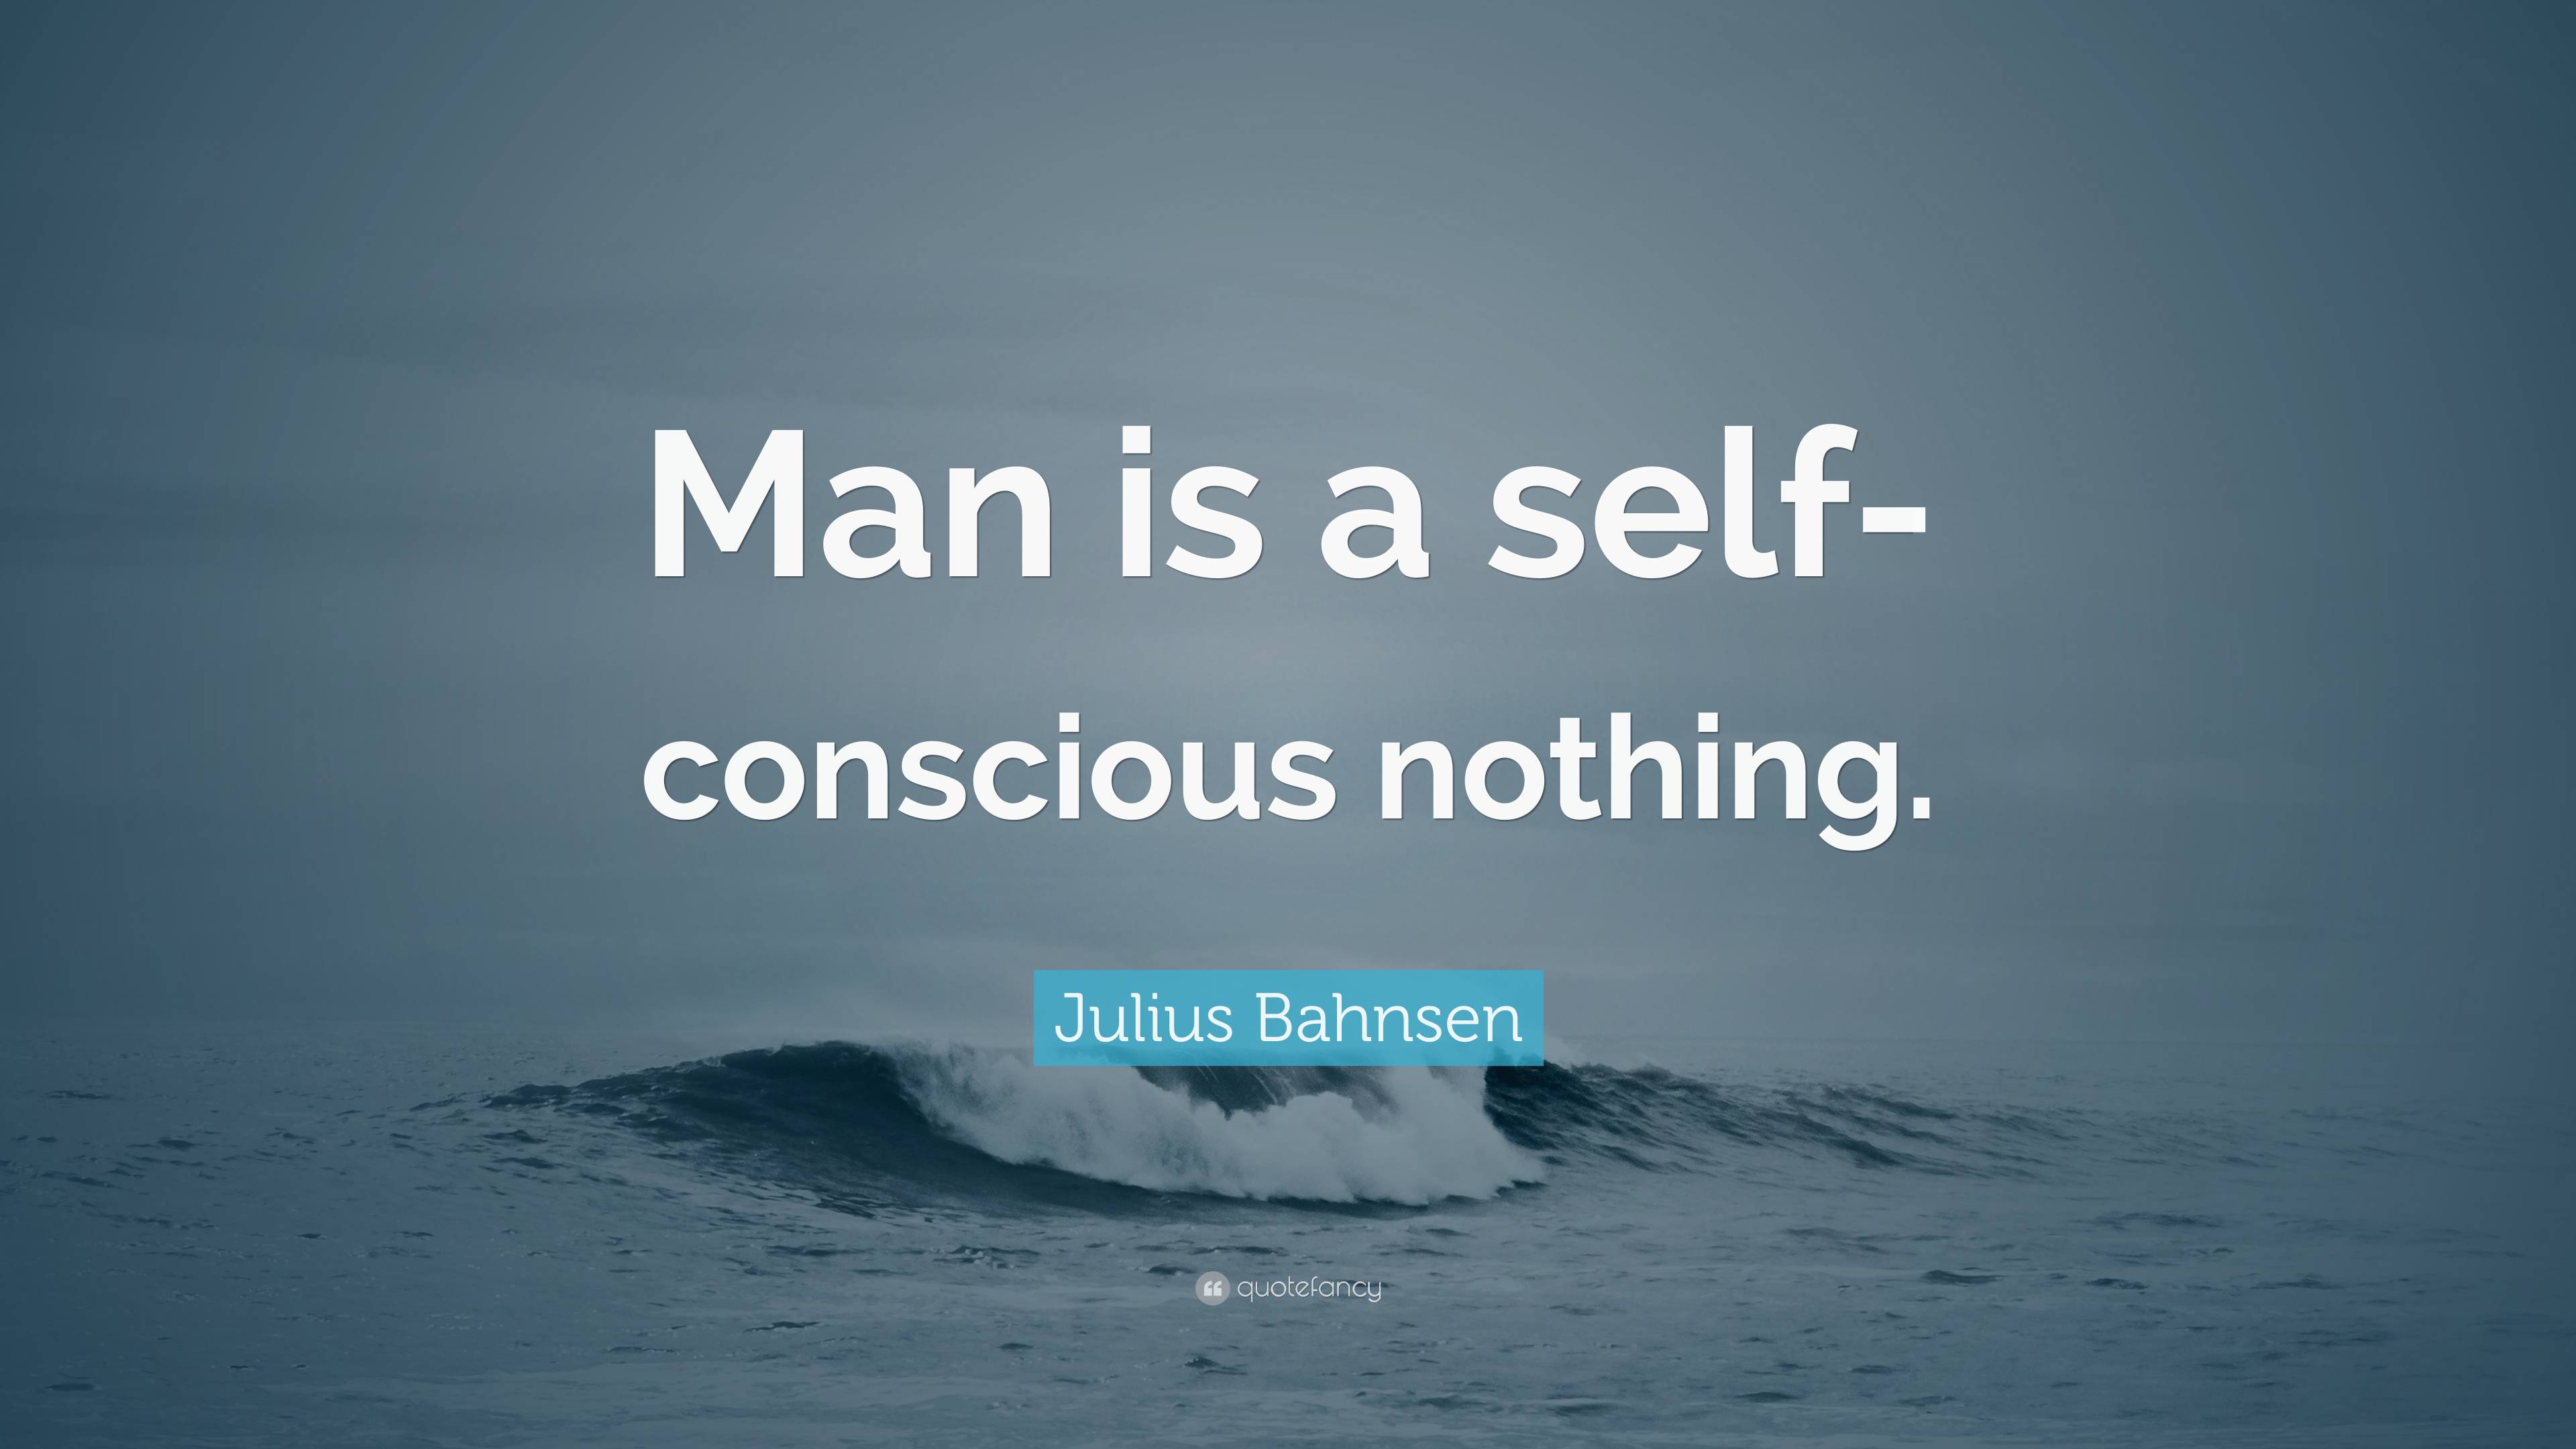 Julius Bahnsen Quote: “Man is a self-conscious nothing.”